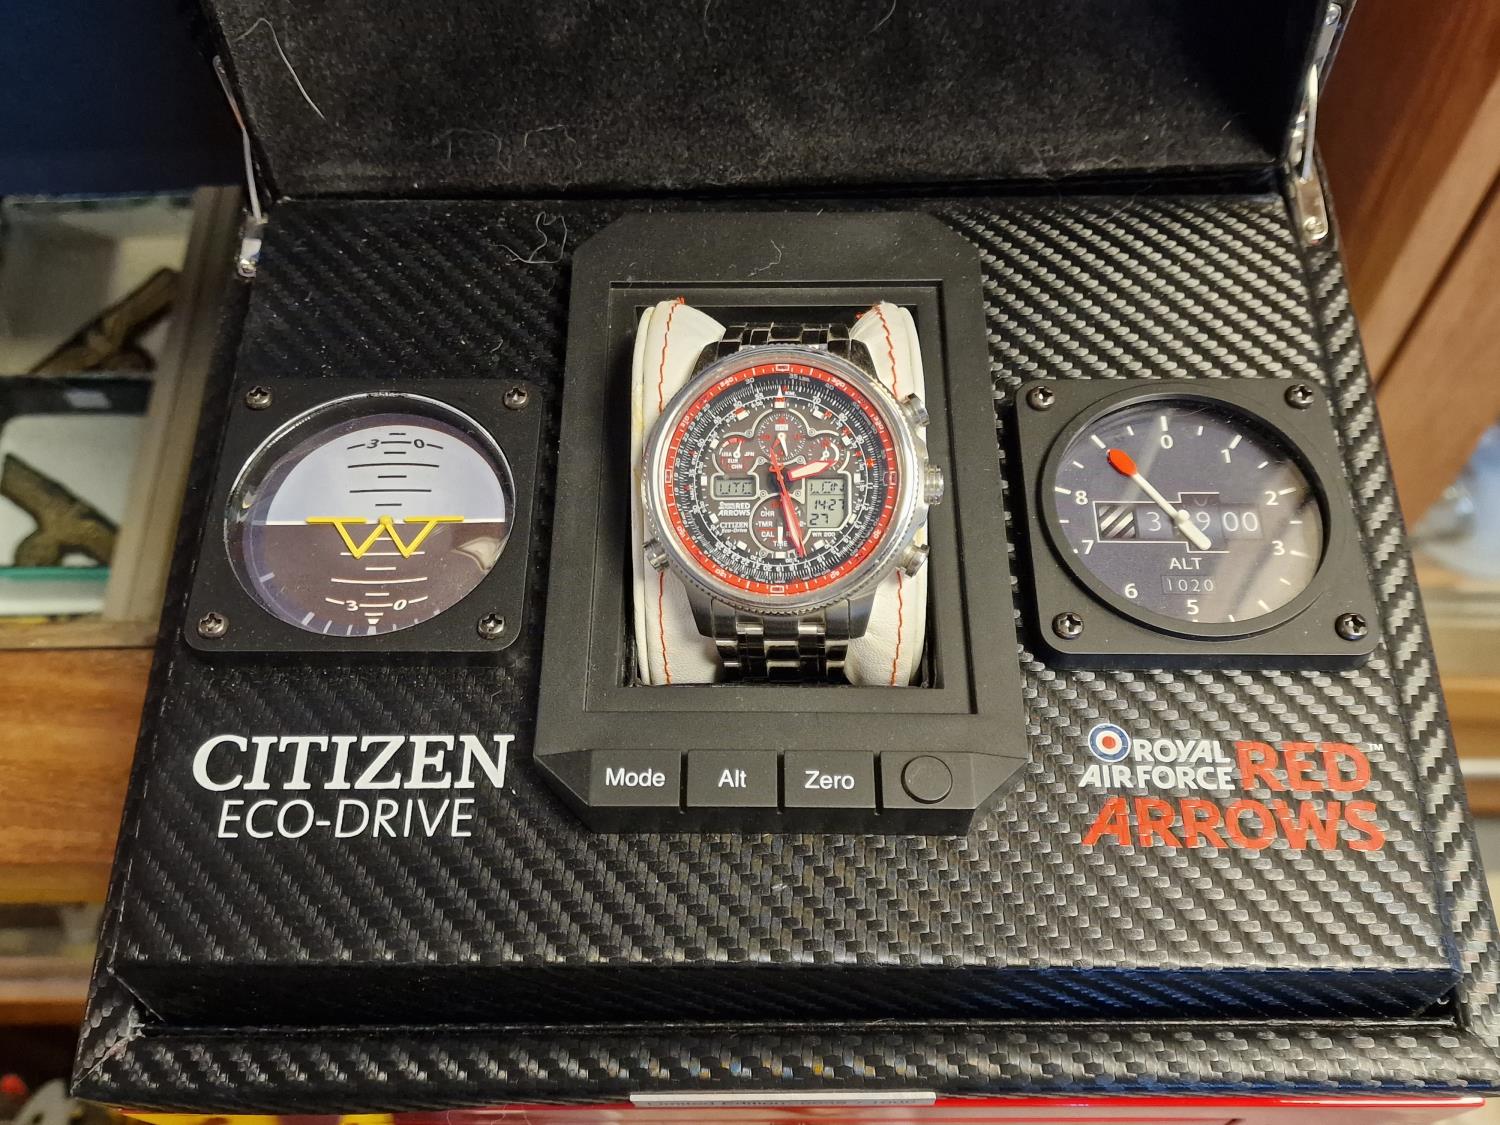 Boxed Citizen Eco-Drive Ecodrive Red Arrows Digital Chronograph Wrist Watch - w/all paperwork and fu - Image 3 of 7